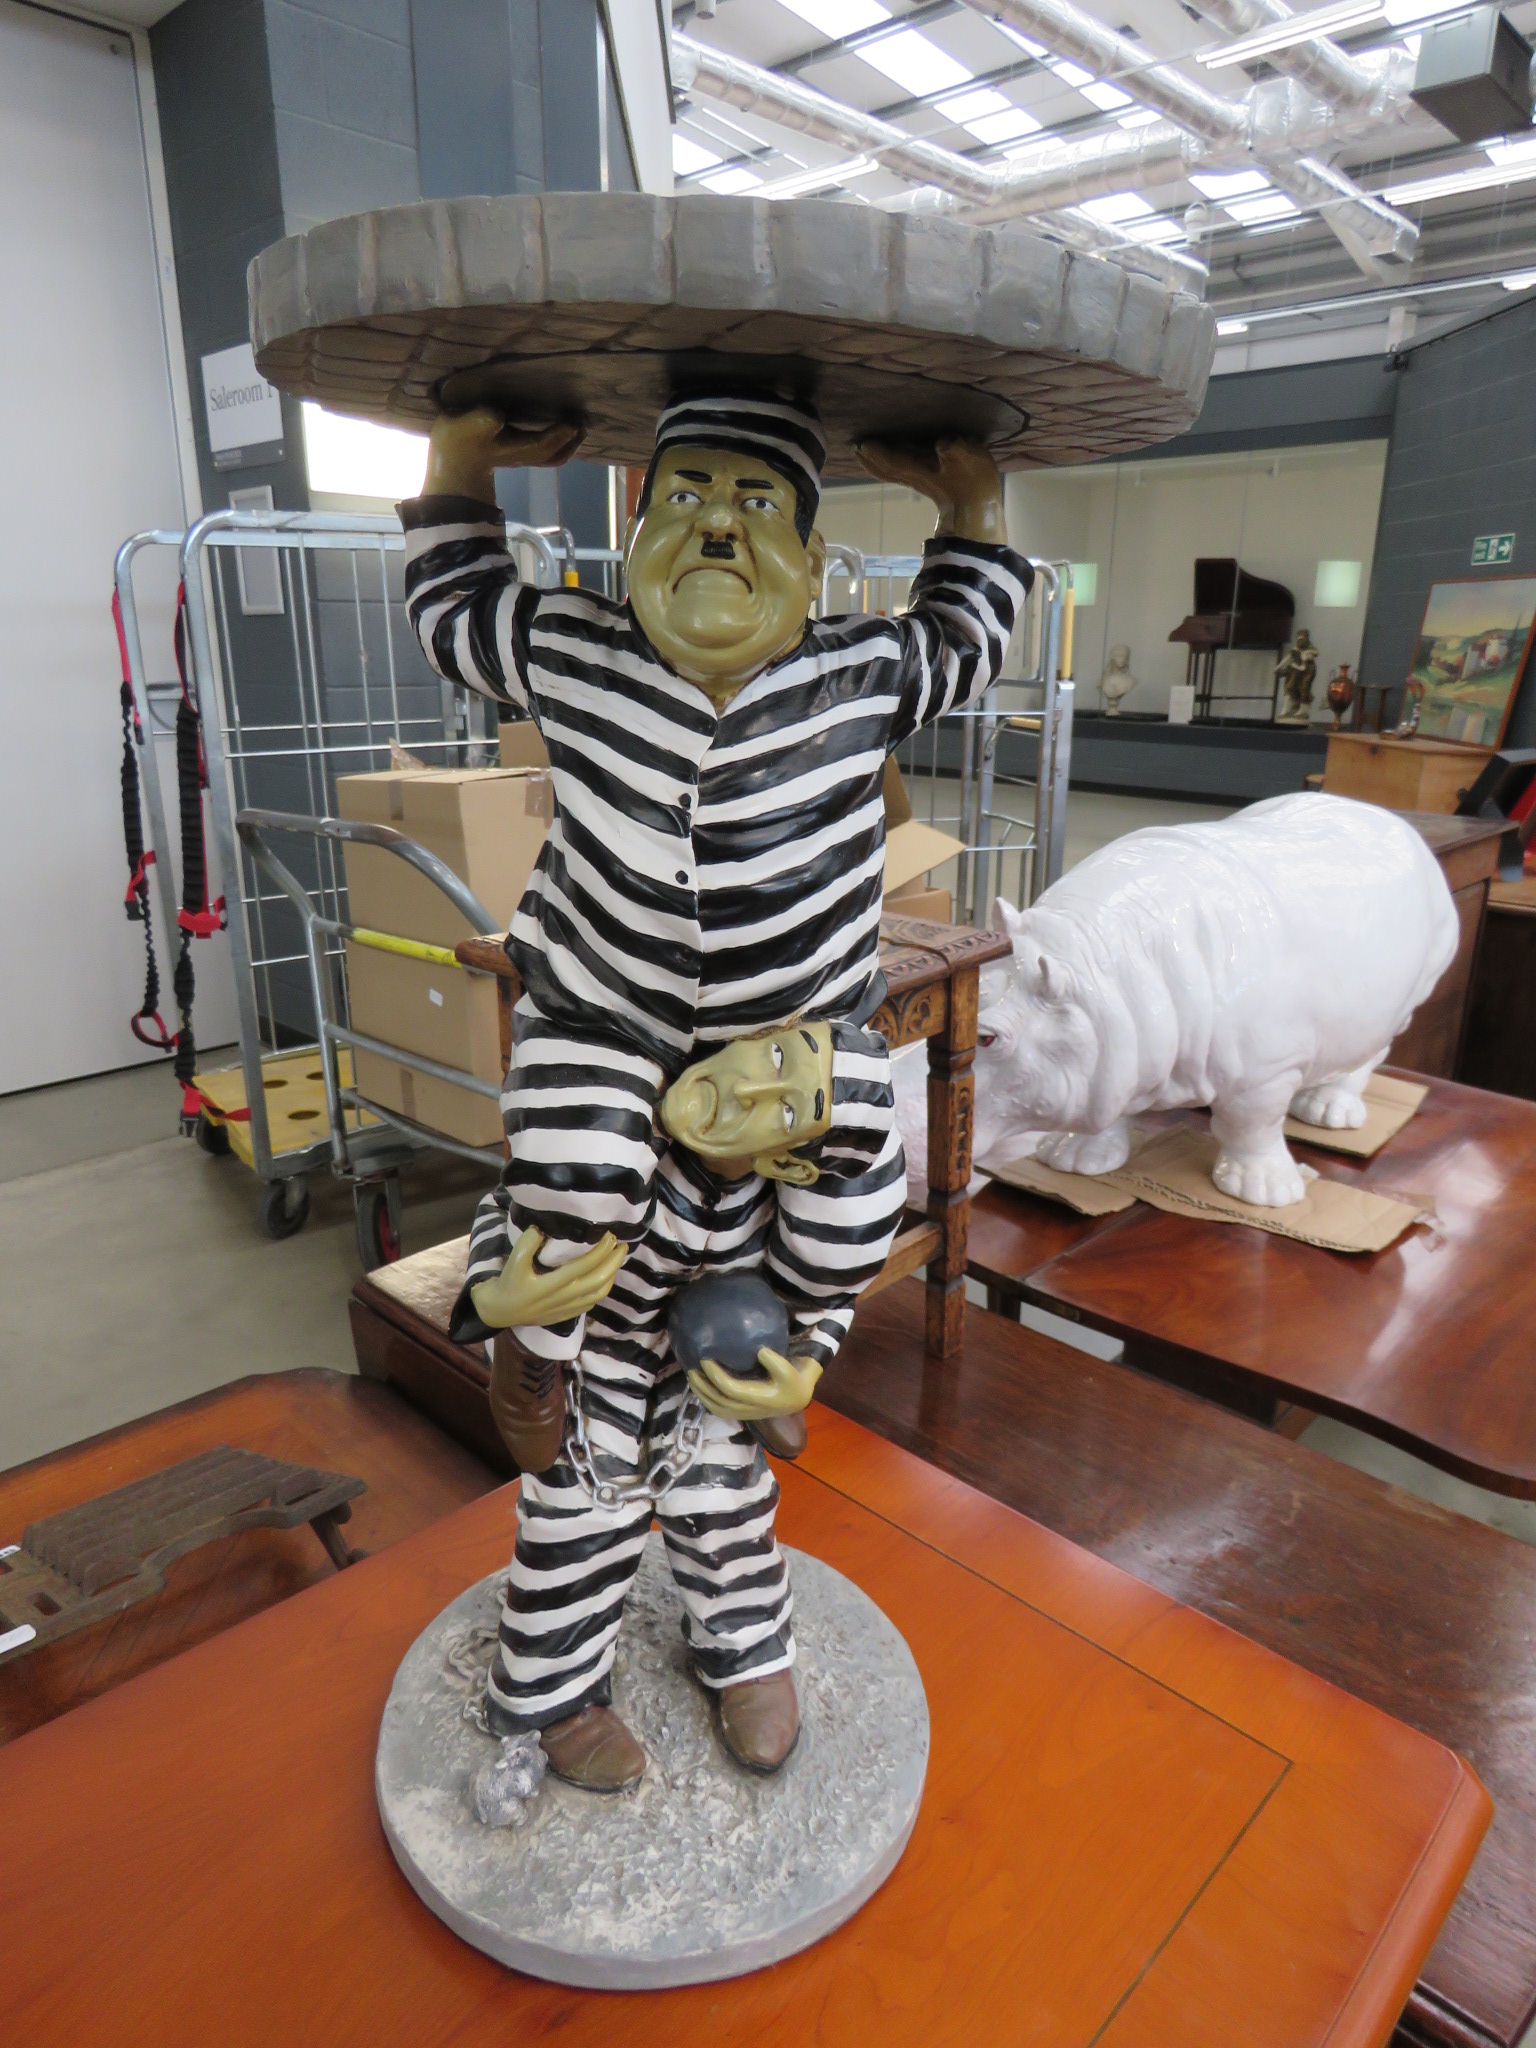 Reproduction table modelled as Laurel and Hardy in prison garb